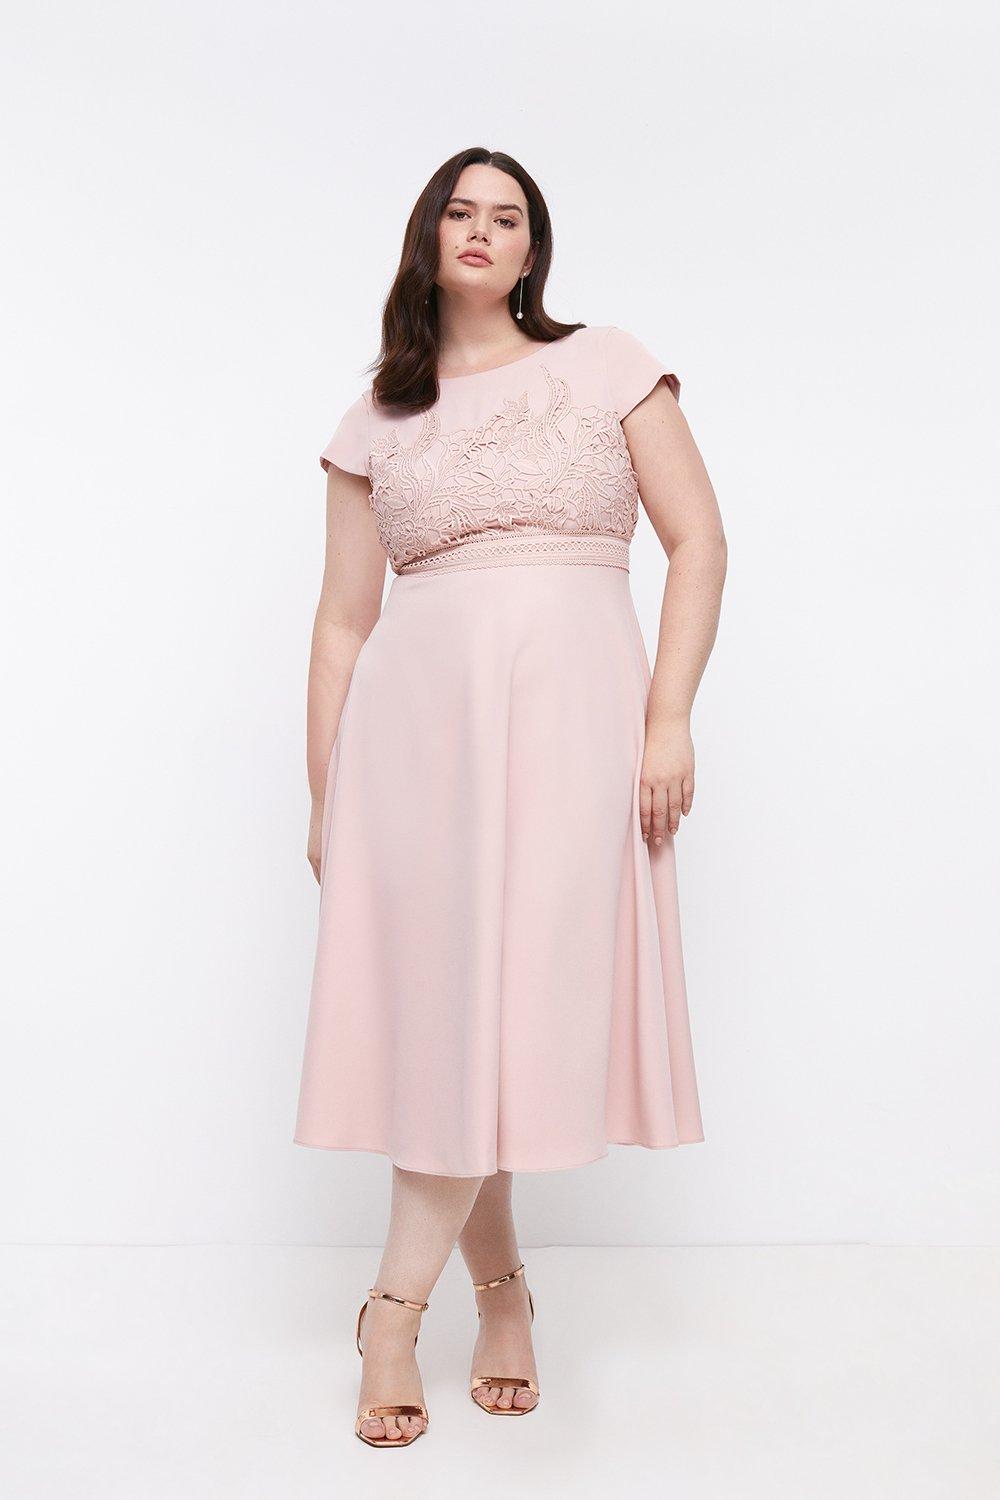 Plus Size Lace Dress With Circular Skirt